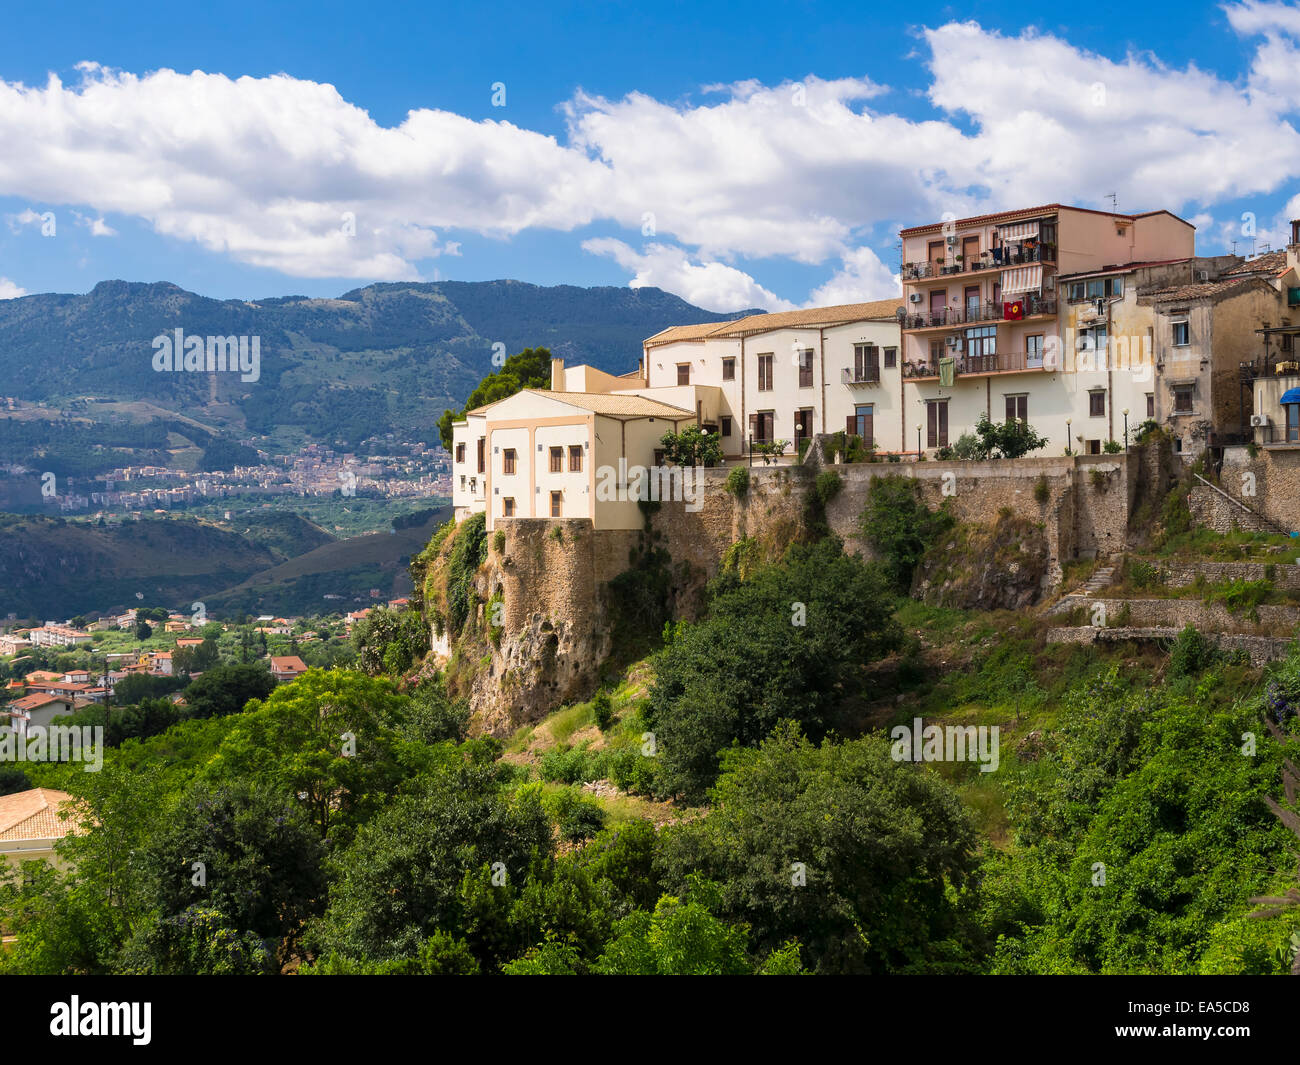 Italy, Sicily, Province of Palermo, Monreale, old houses on rocky cliff Stock Photo